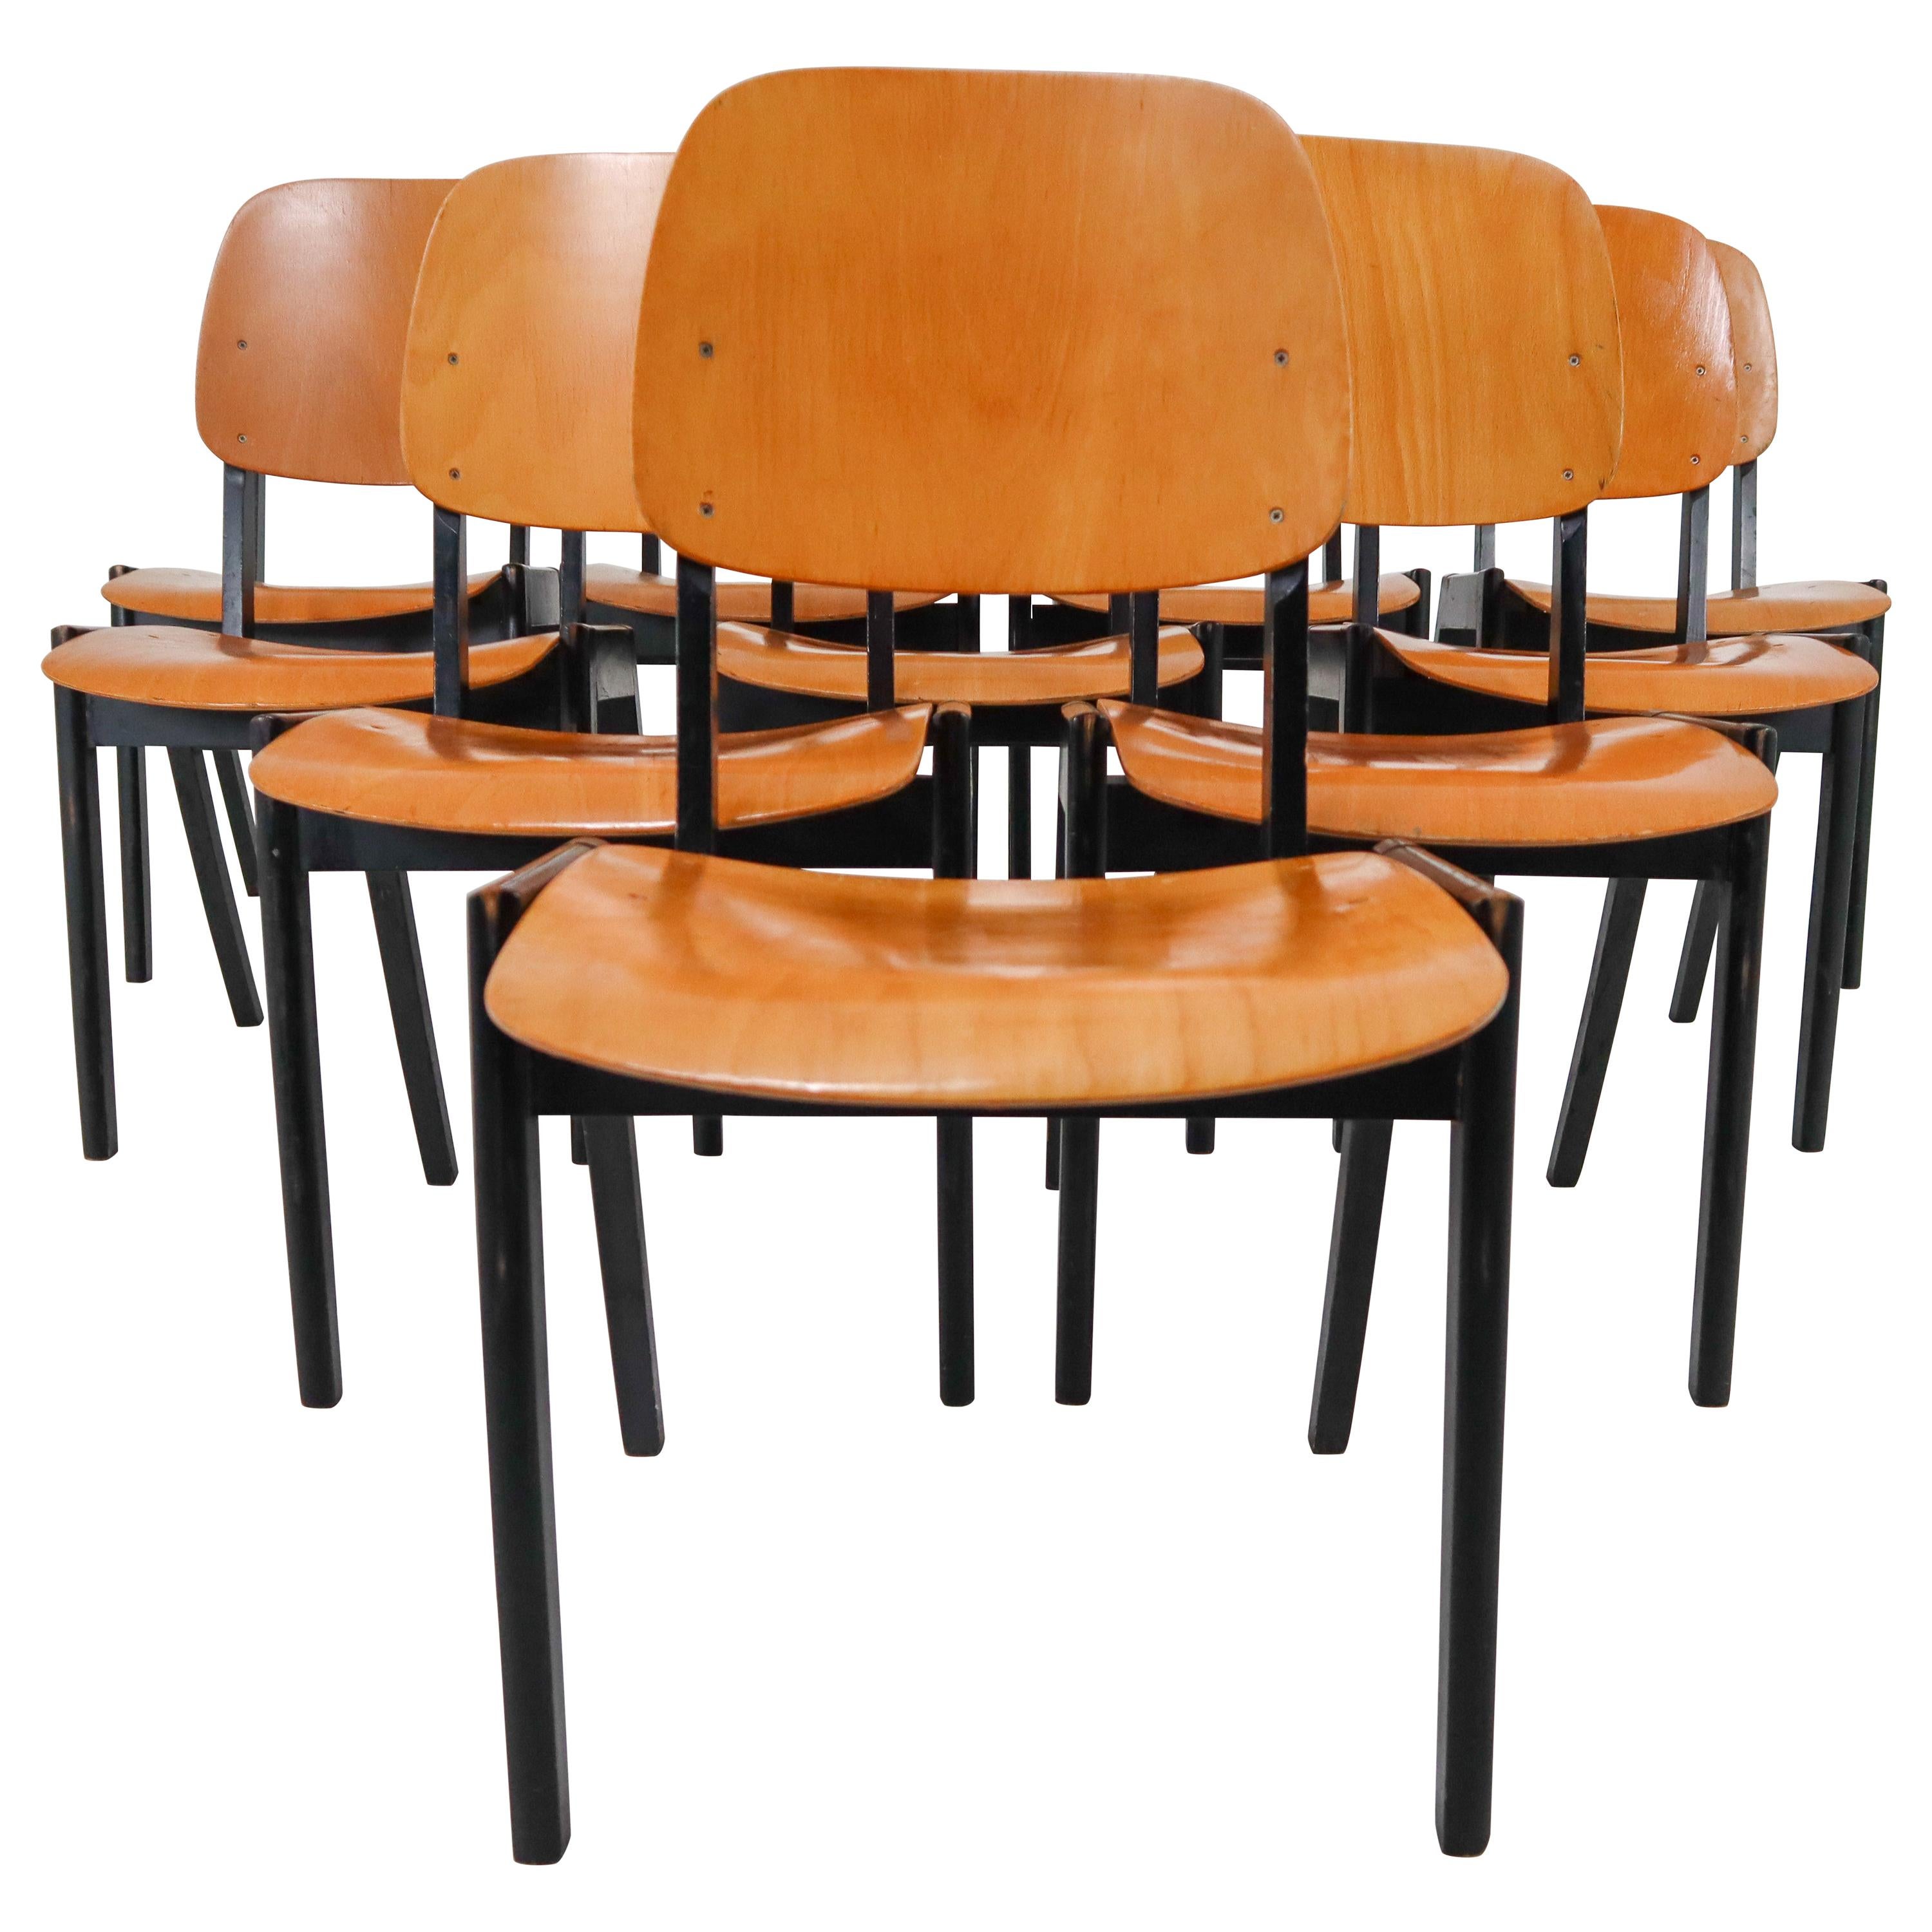 50 Bicolored Stacking Chairs Designed in the Manner of Roland Rainer, 1960s